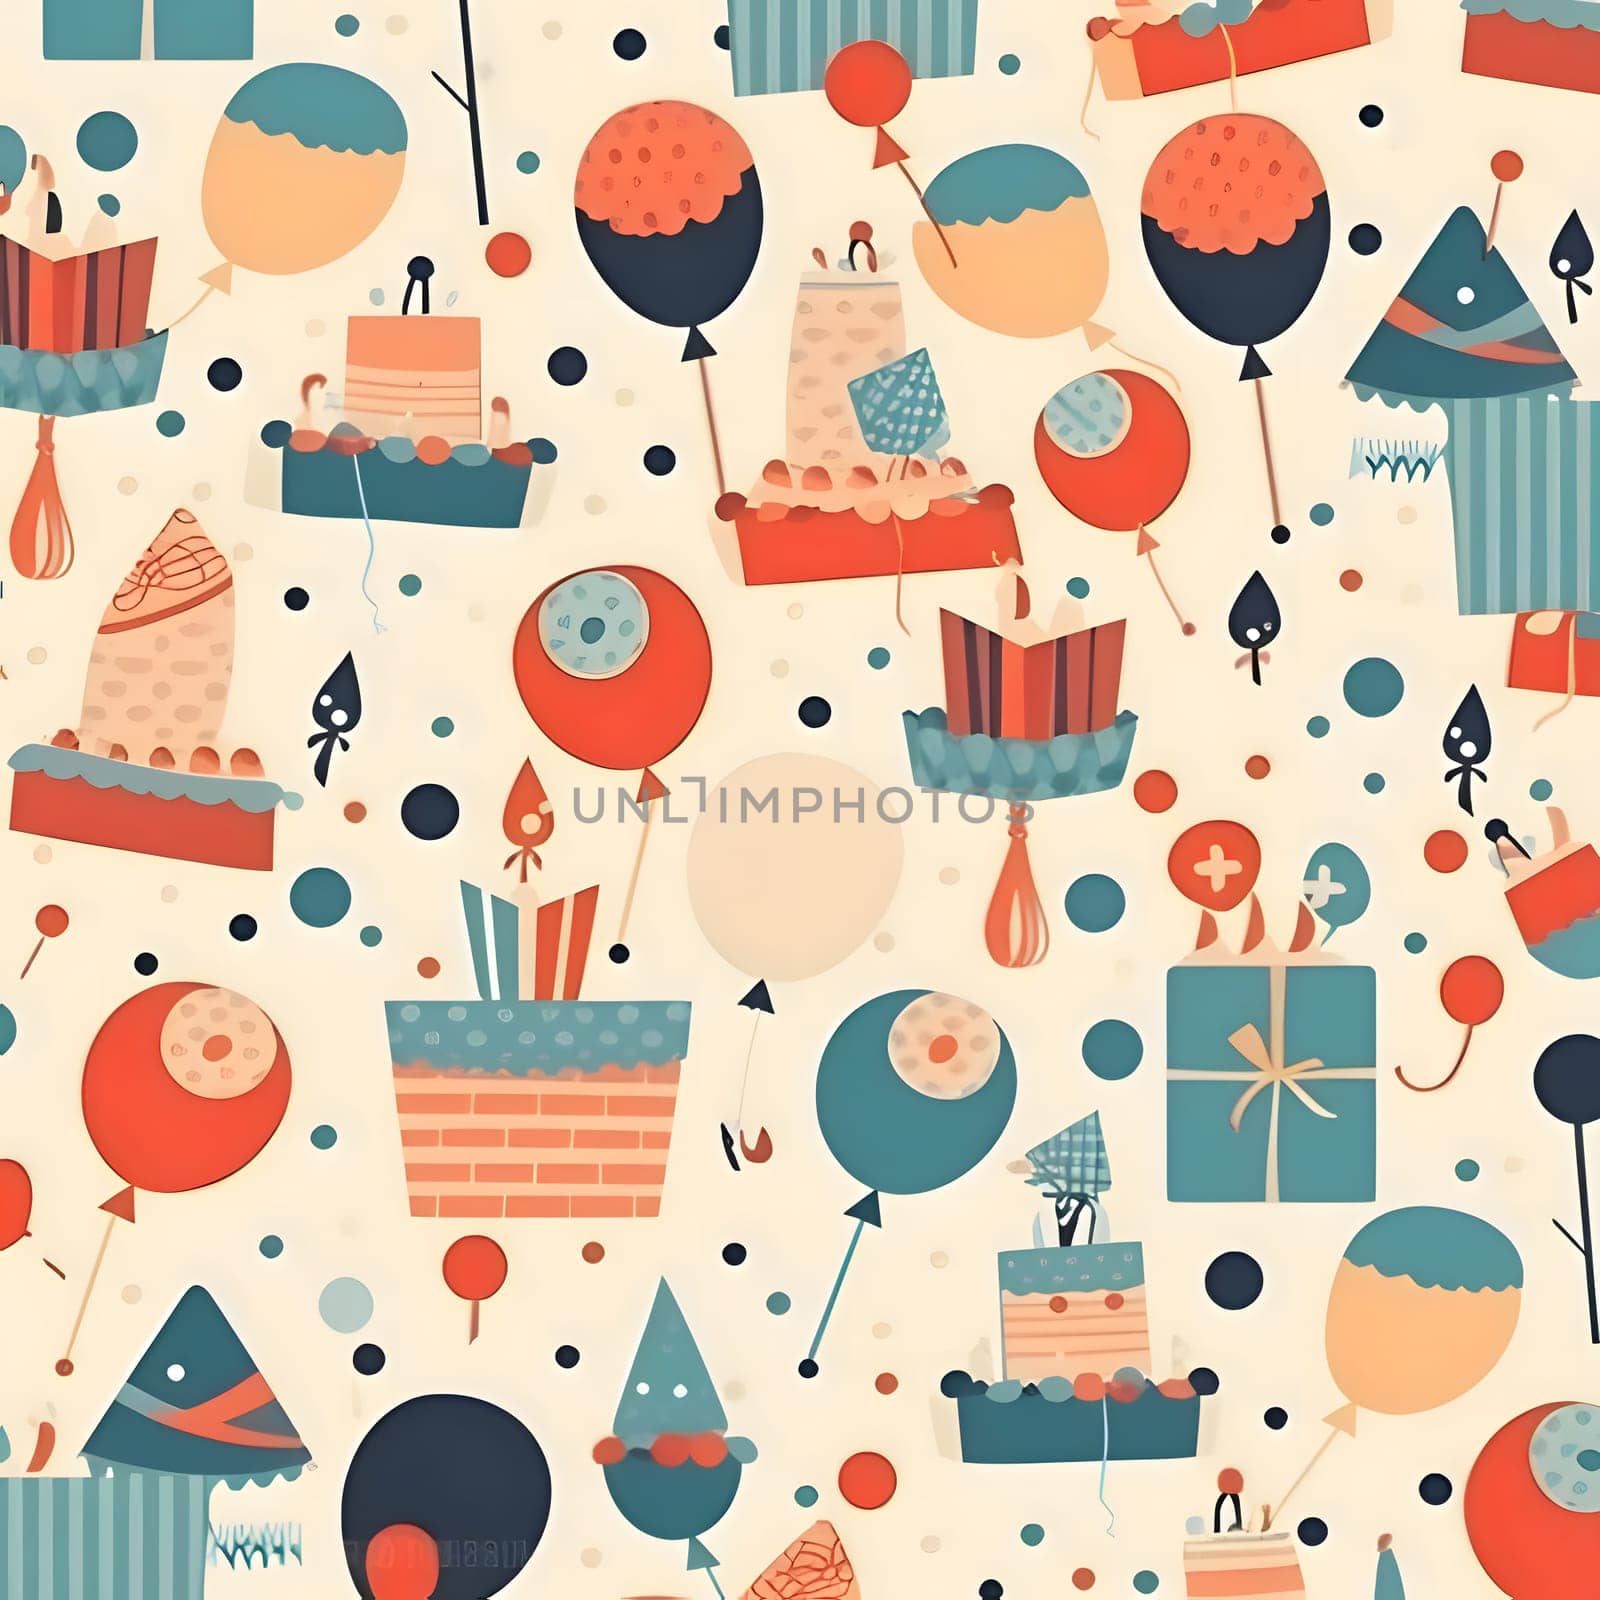 Patterns and banners backgrounds: Seamless birthday pattern with balloons, gift boxes and cakes. Vector illustration.